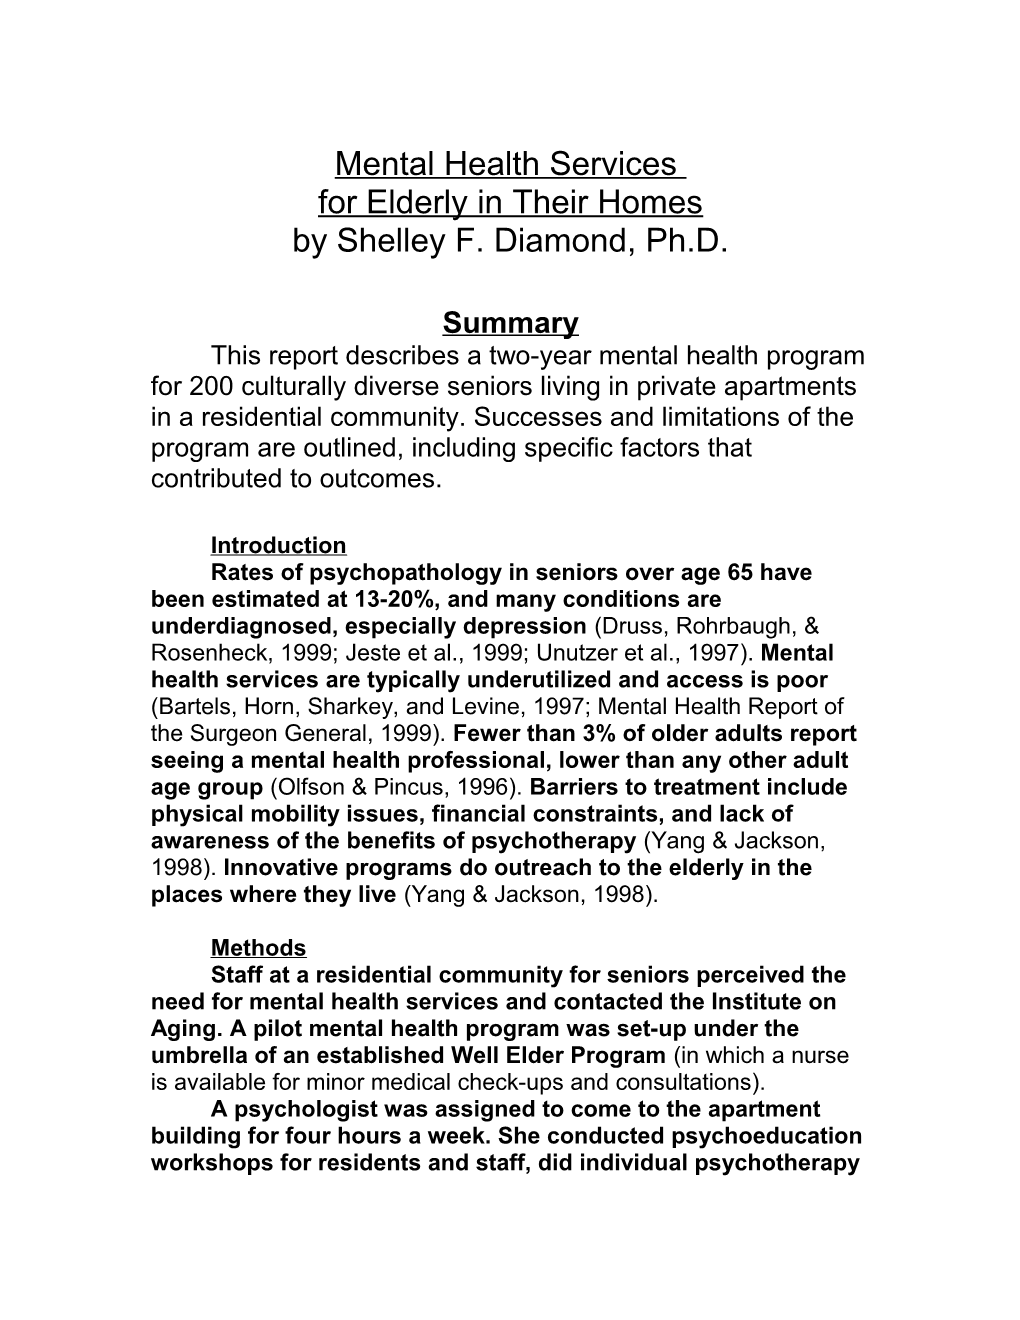 Western Park Apartments Referral for Mental Health Services